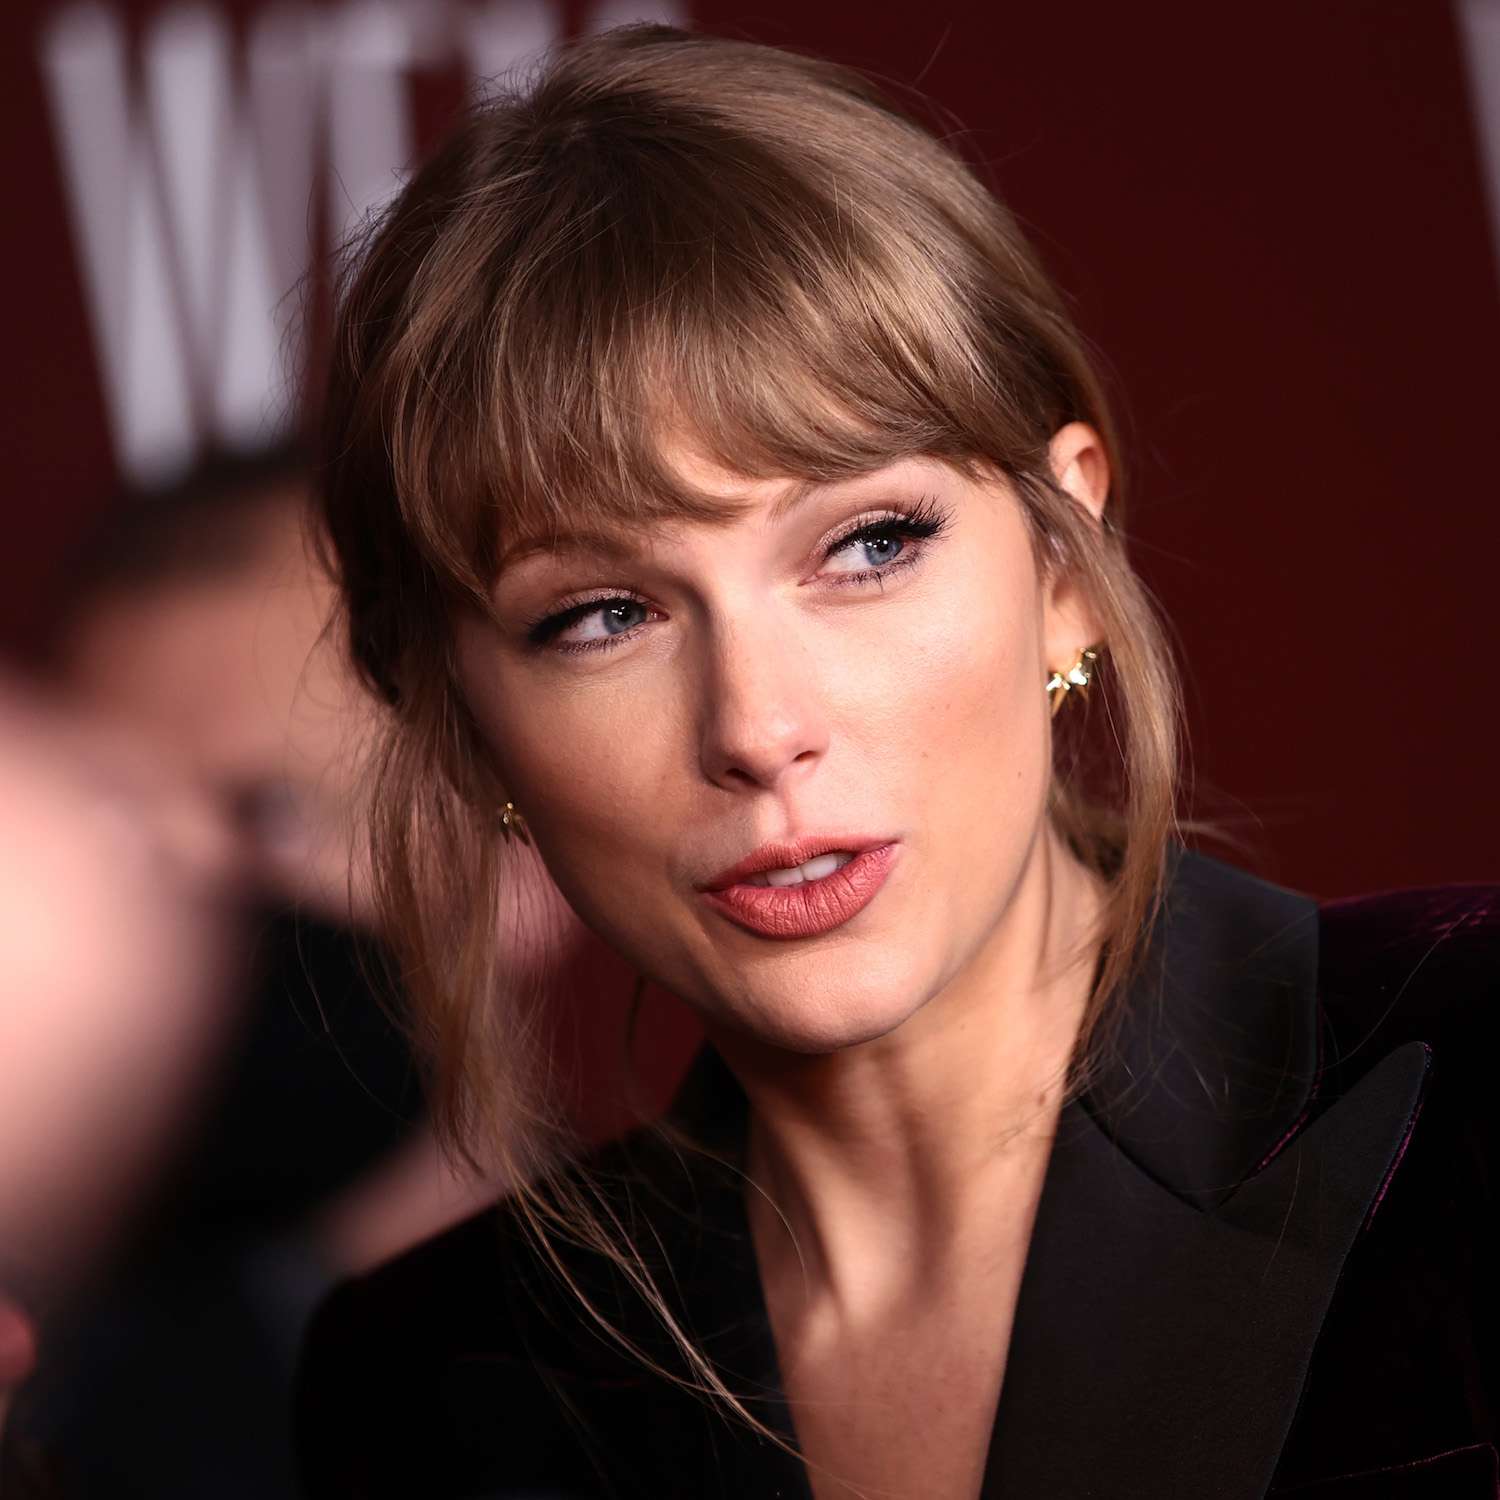 Taylor Swift wears a low updo hairstyle with bangs and wispy face-framing layers